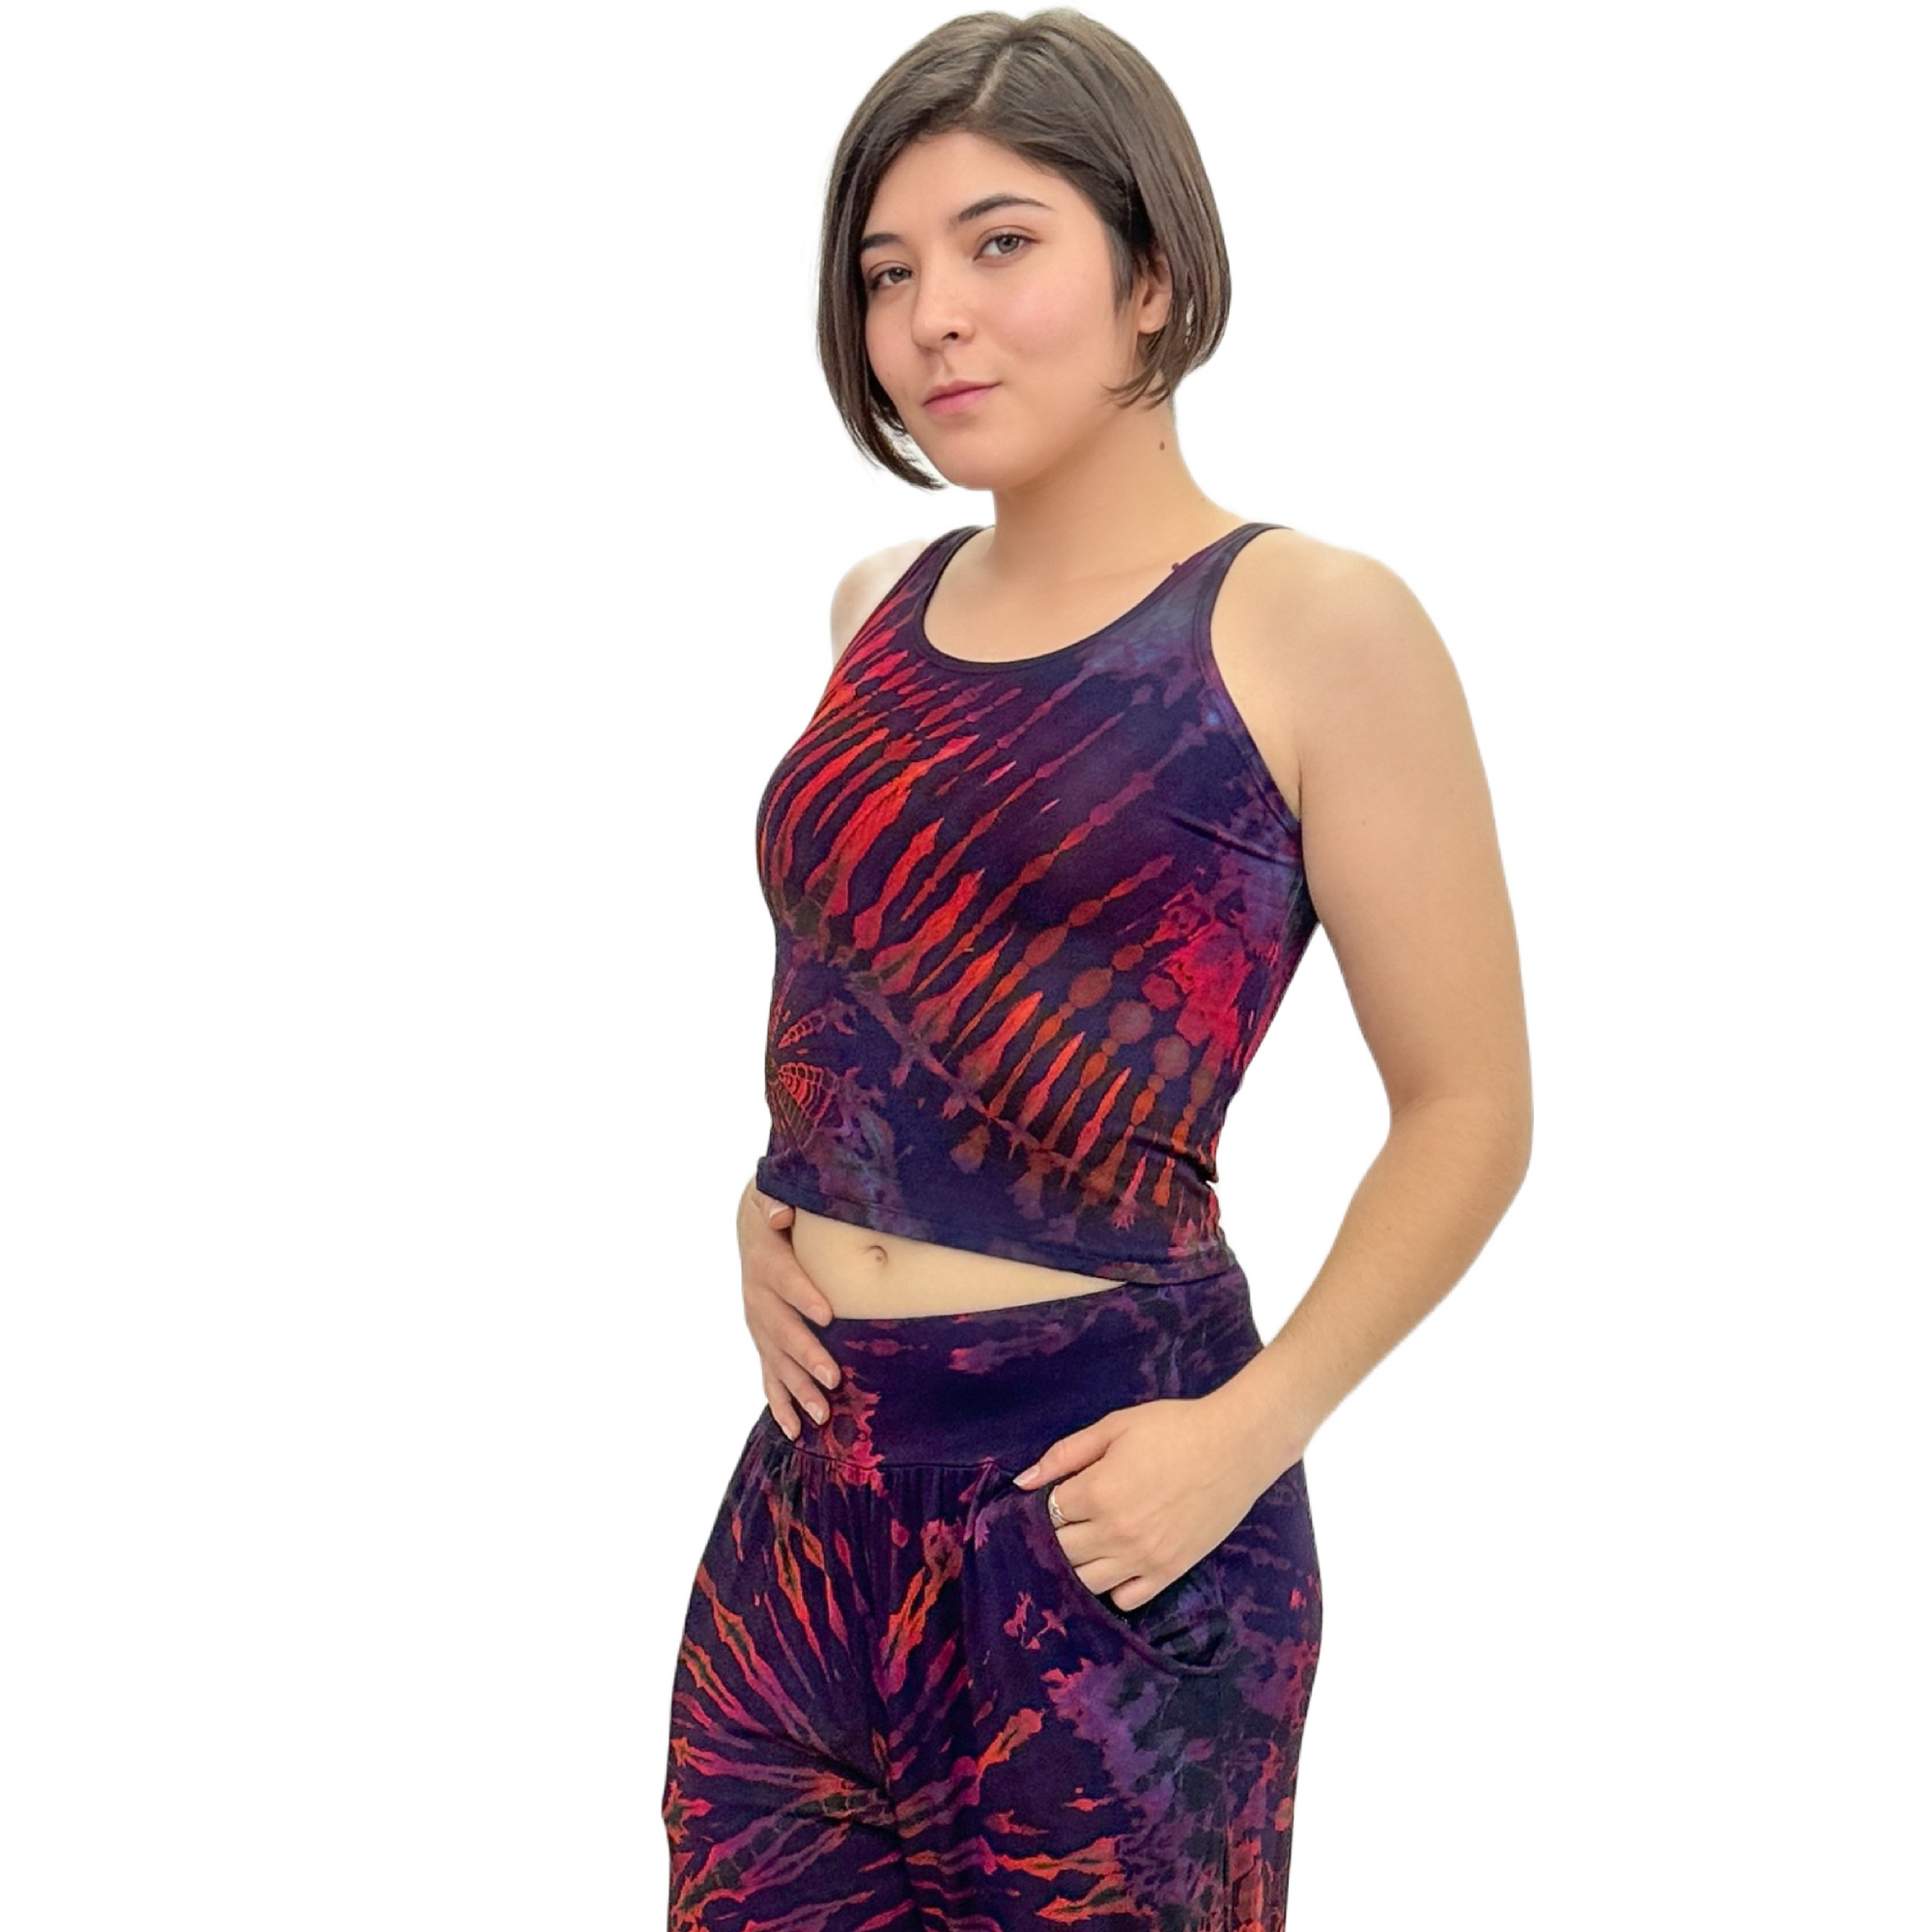 Tie-Dye High Neck Stretchy Rayon Crop Top